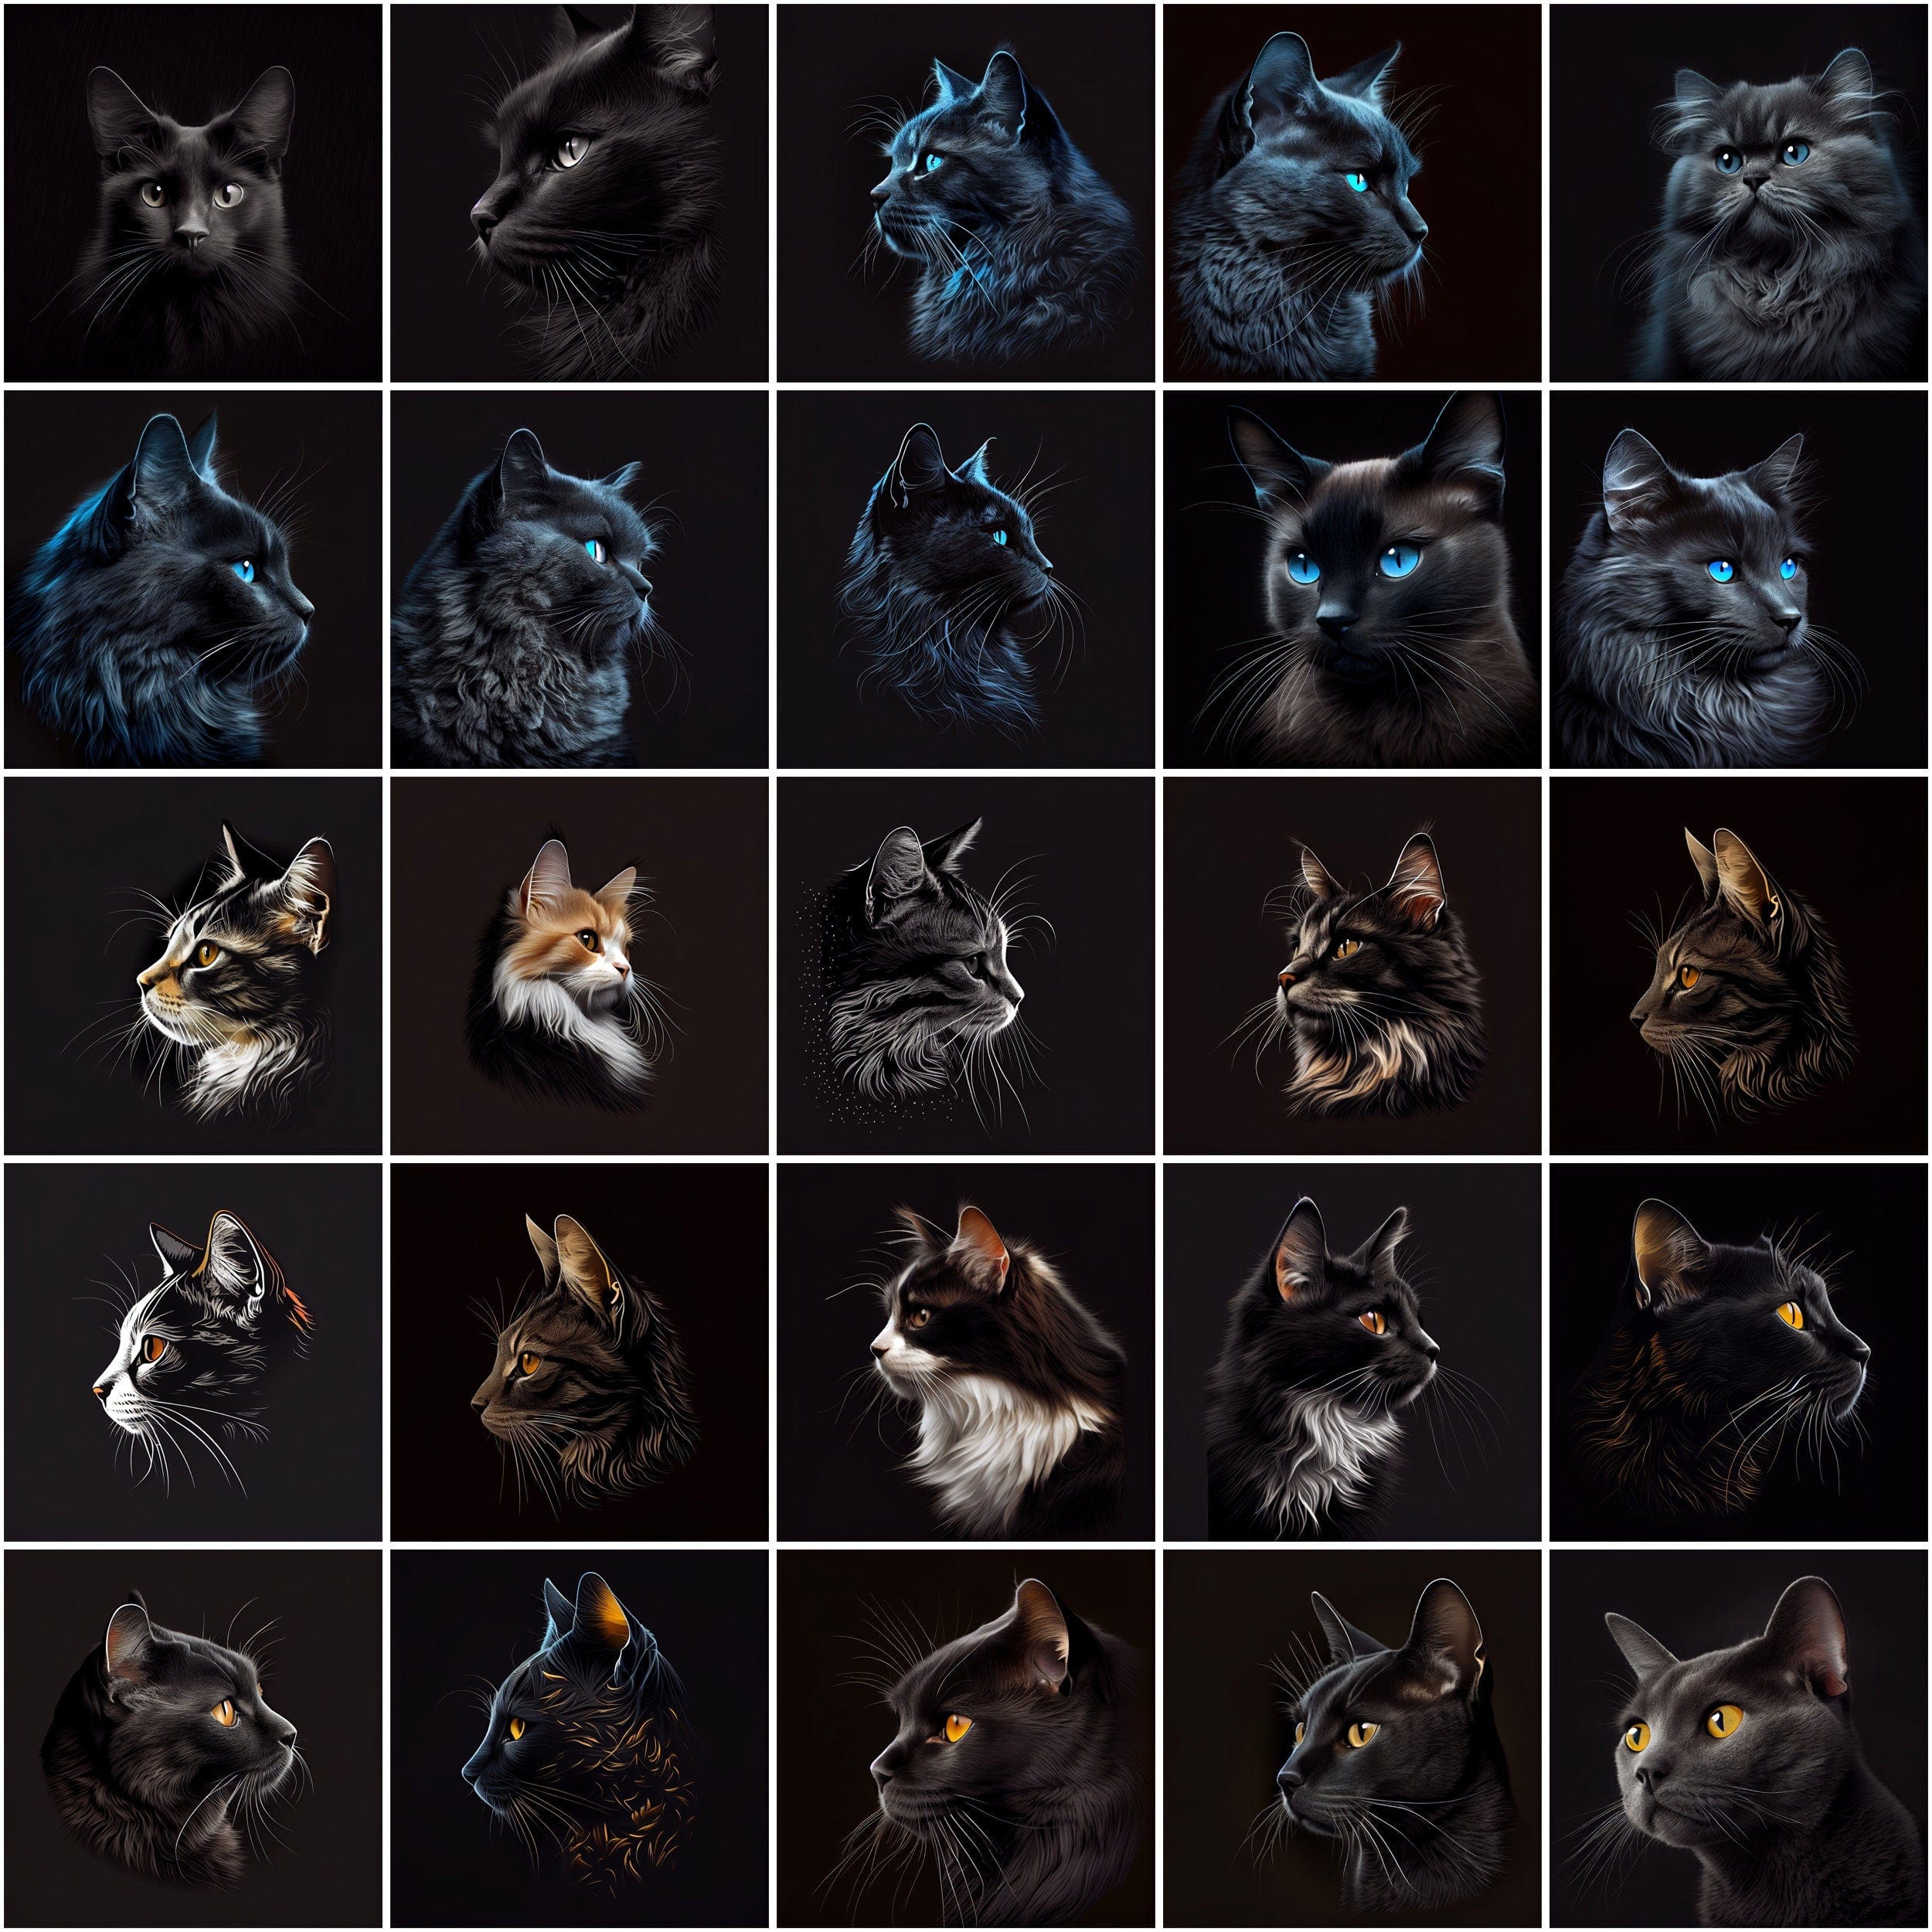 Cat Breeds Around the World, 480 Cat Breed Images with Commercial License, Cat clipart with different breeds isolated on black bakground Digital Download Sumobundle